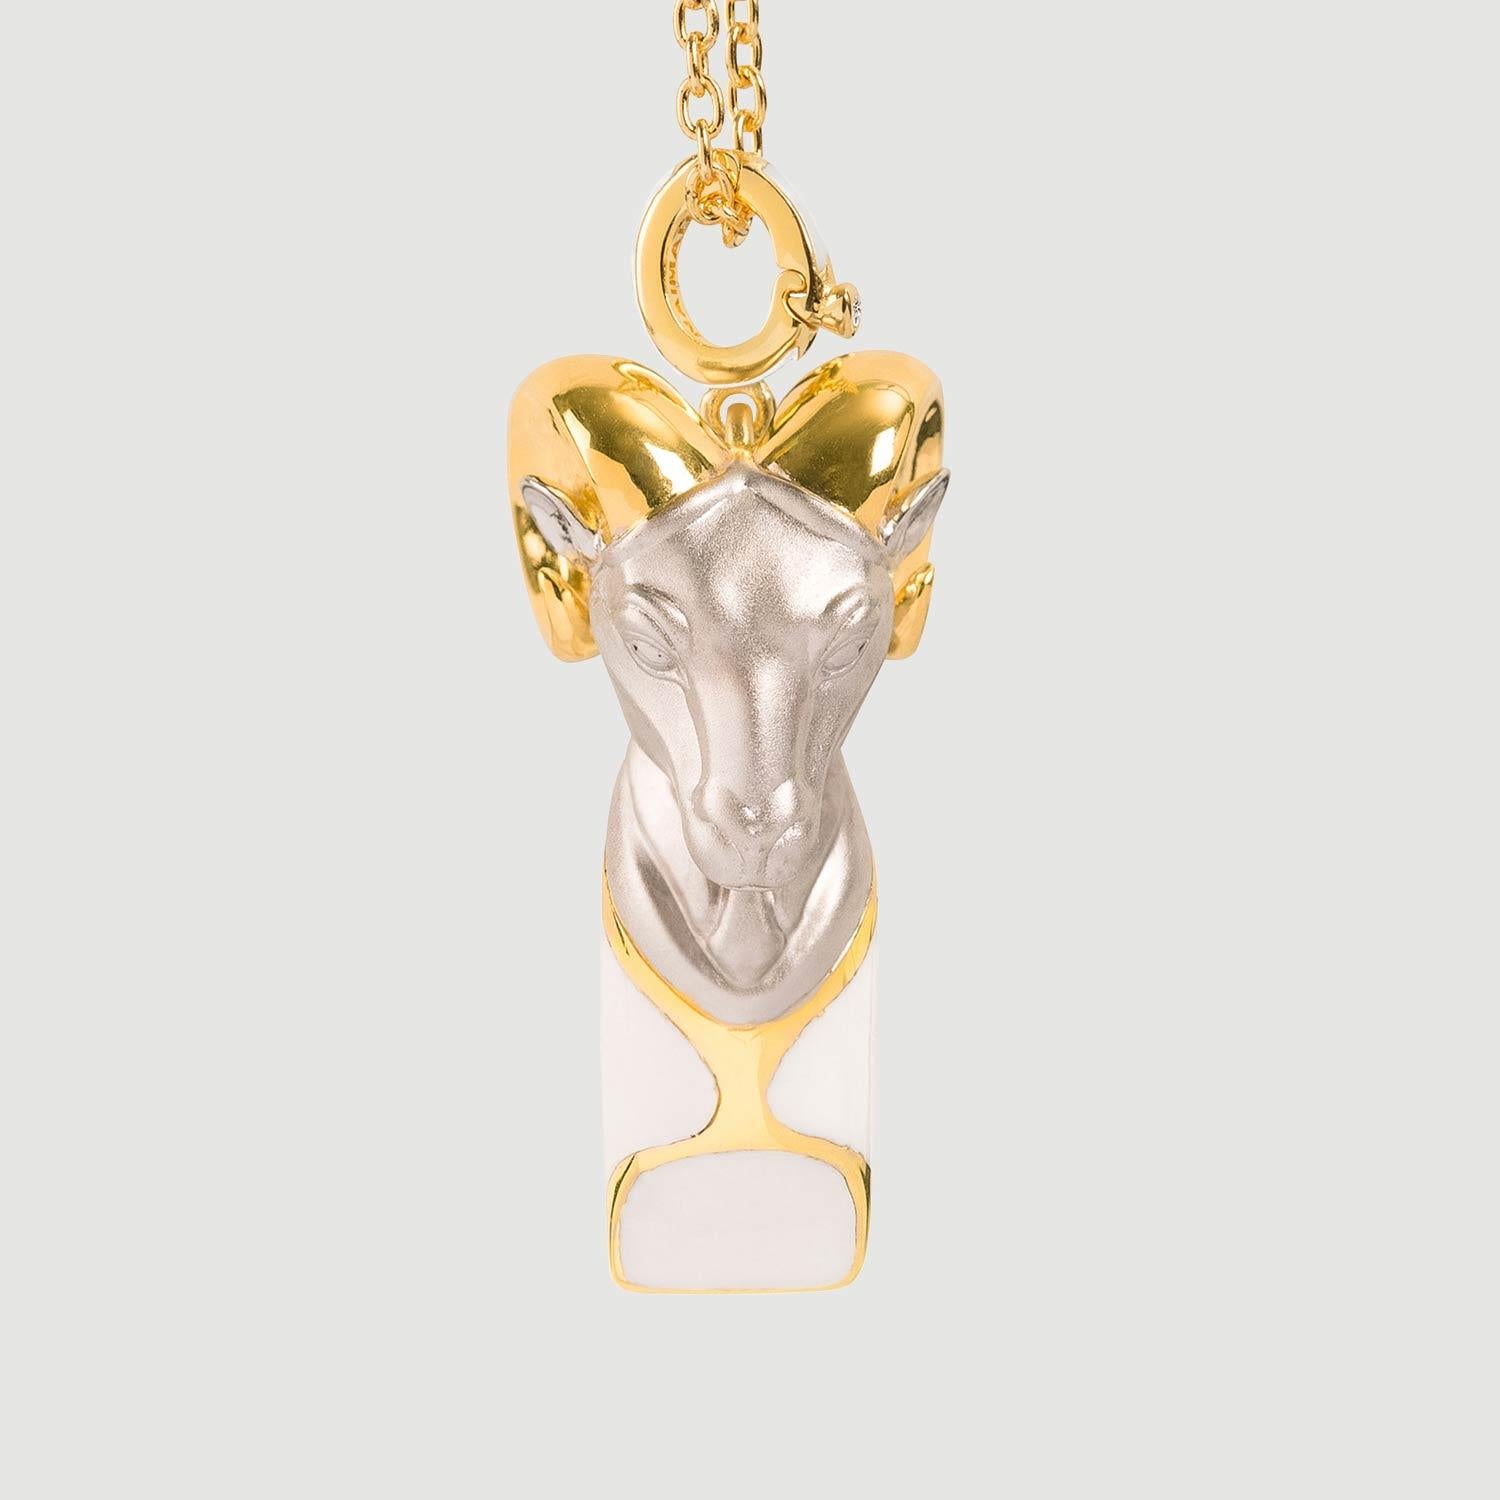 Introducing our stunning gold vermeil pendant necklace - a functional whistle with a modern twist on antique dog whistles. This unique piece is perfect for those who value both style and practicality. With its sleek design and high-quality